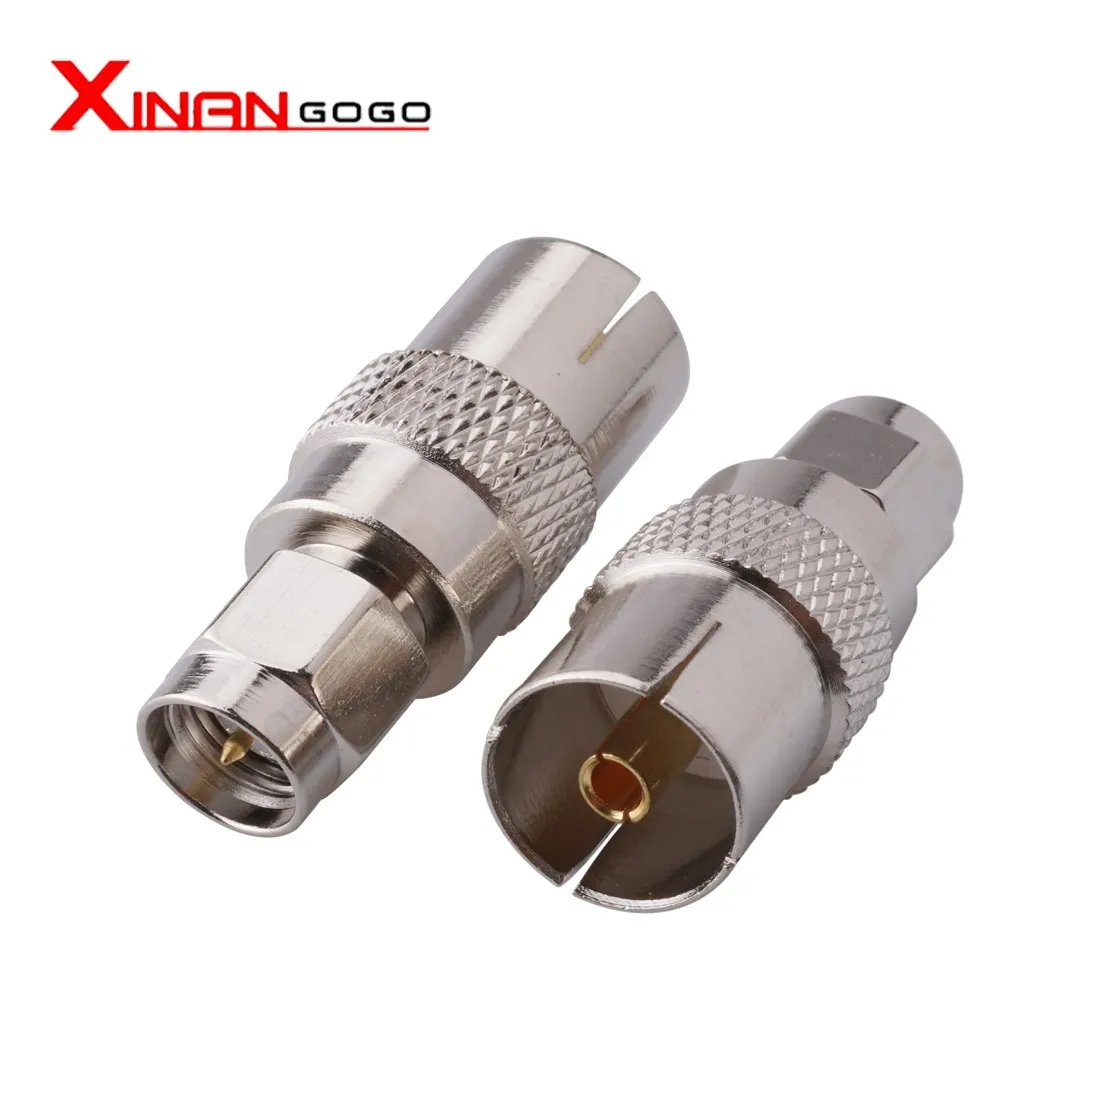 Xinangogo Coaxial Adapter SMA Male Plug to IEC TV Female Jack Straight Connector Nickel plated For TV Antenna